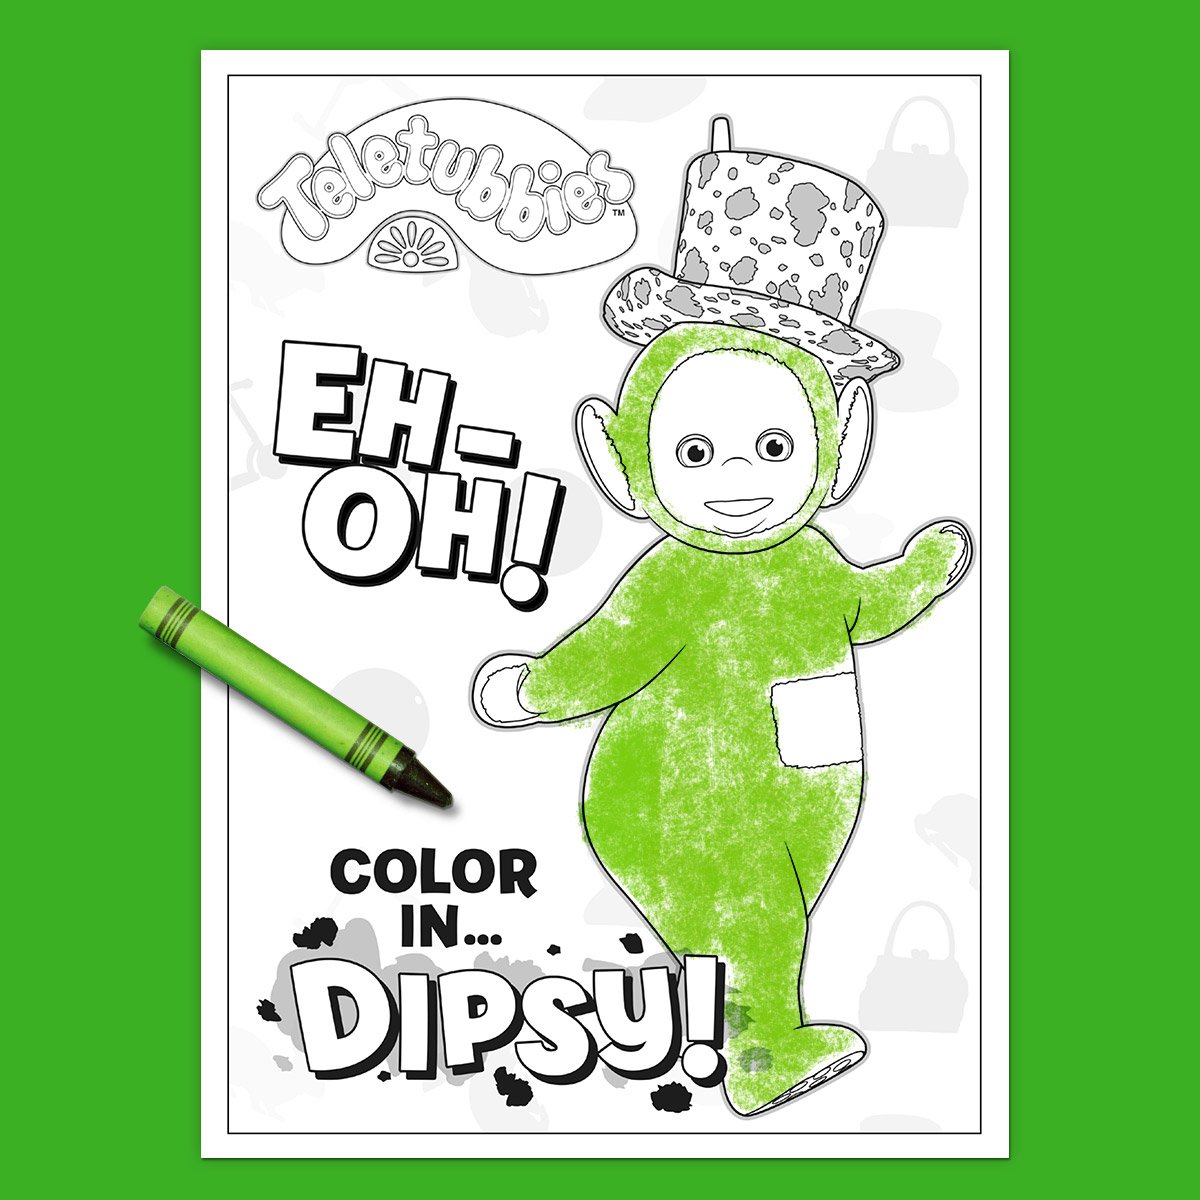 Teletubbies Coloring Page: Dipsy